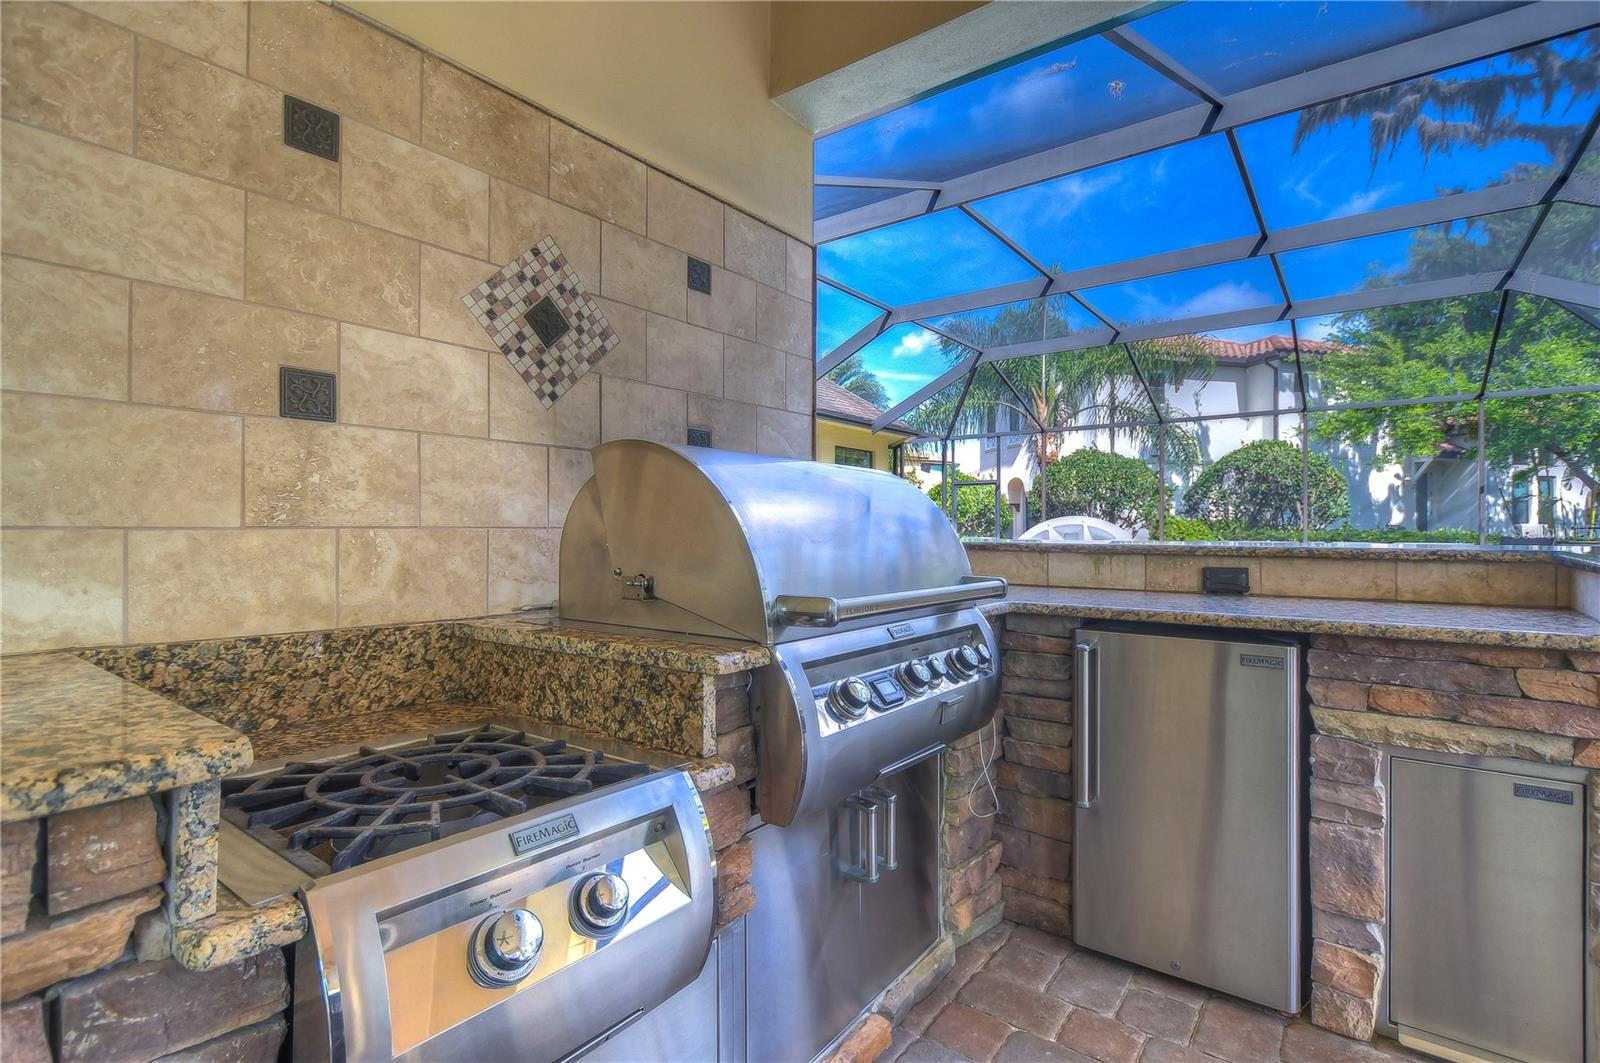 Top-of-the-line outdoor kitchen complete with a fire magic gas grill, burner, and fridge!